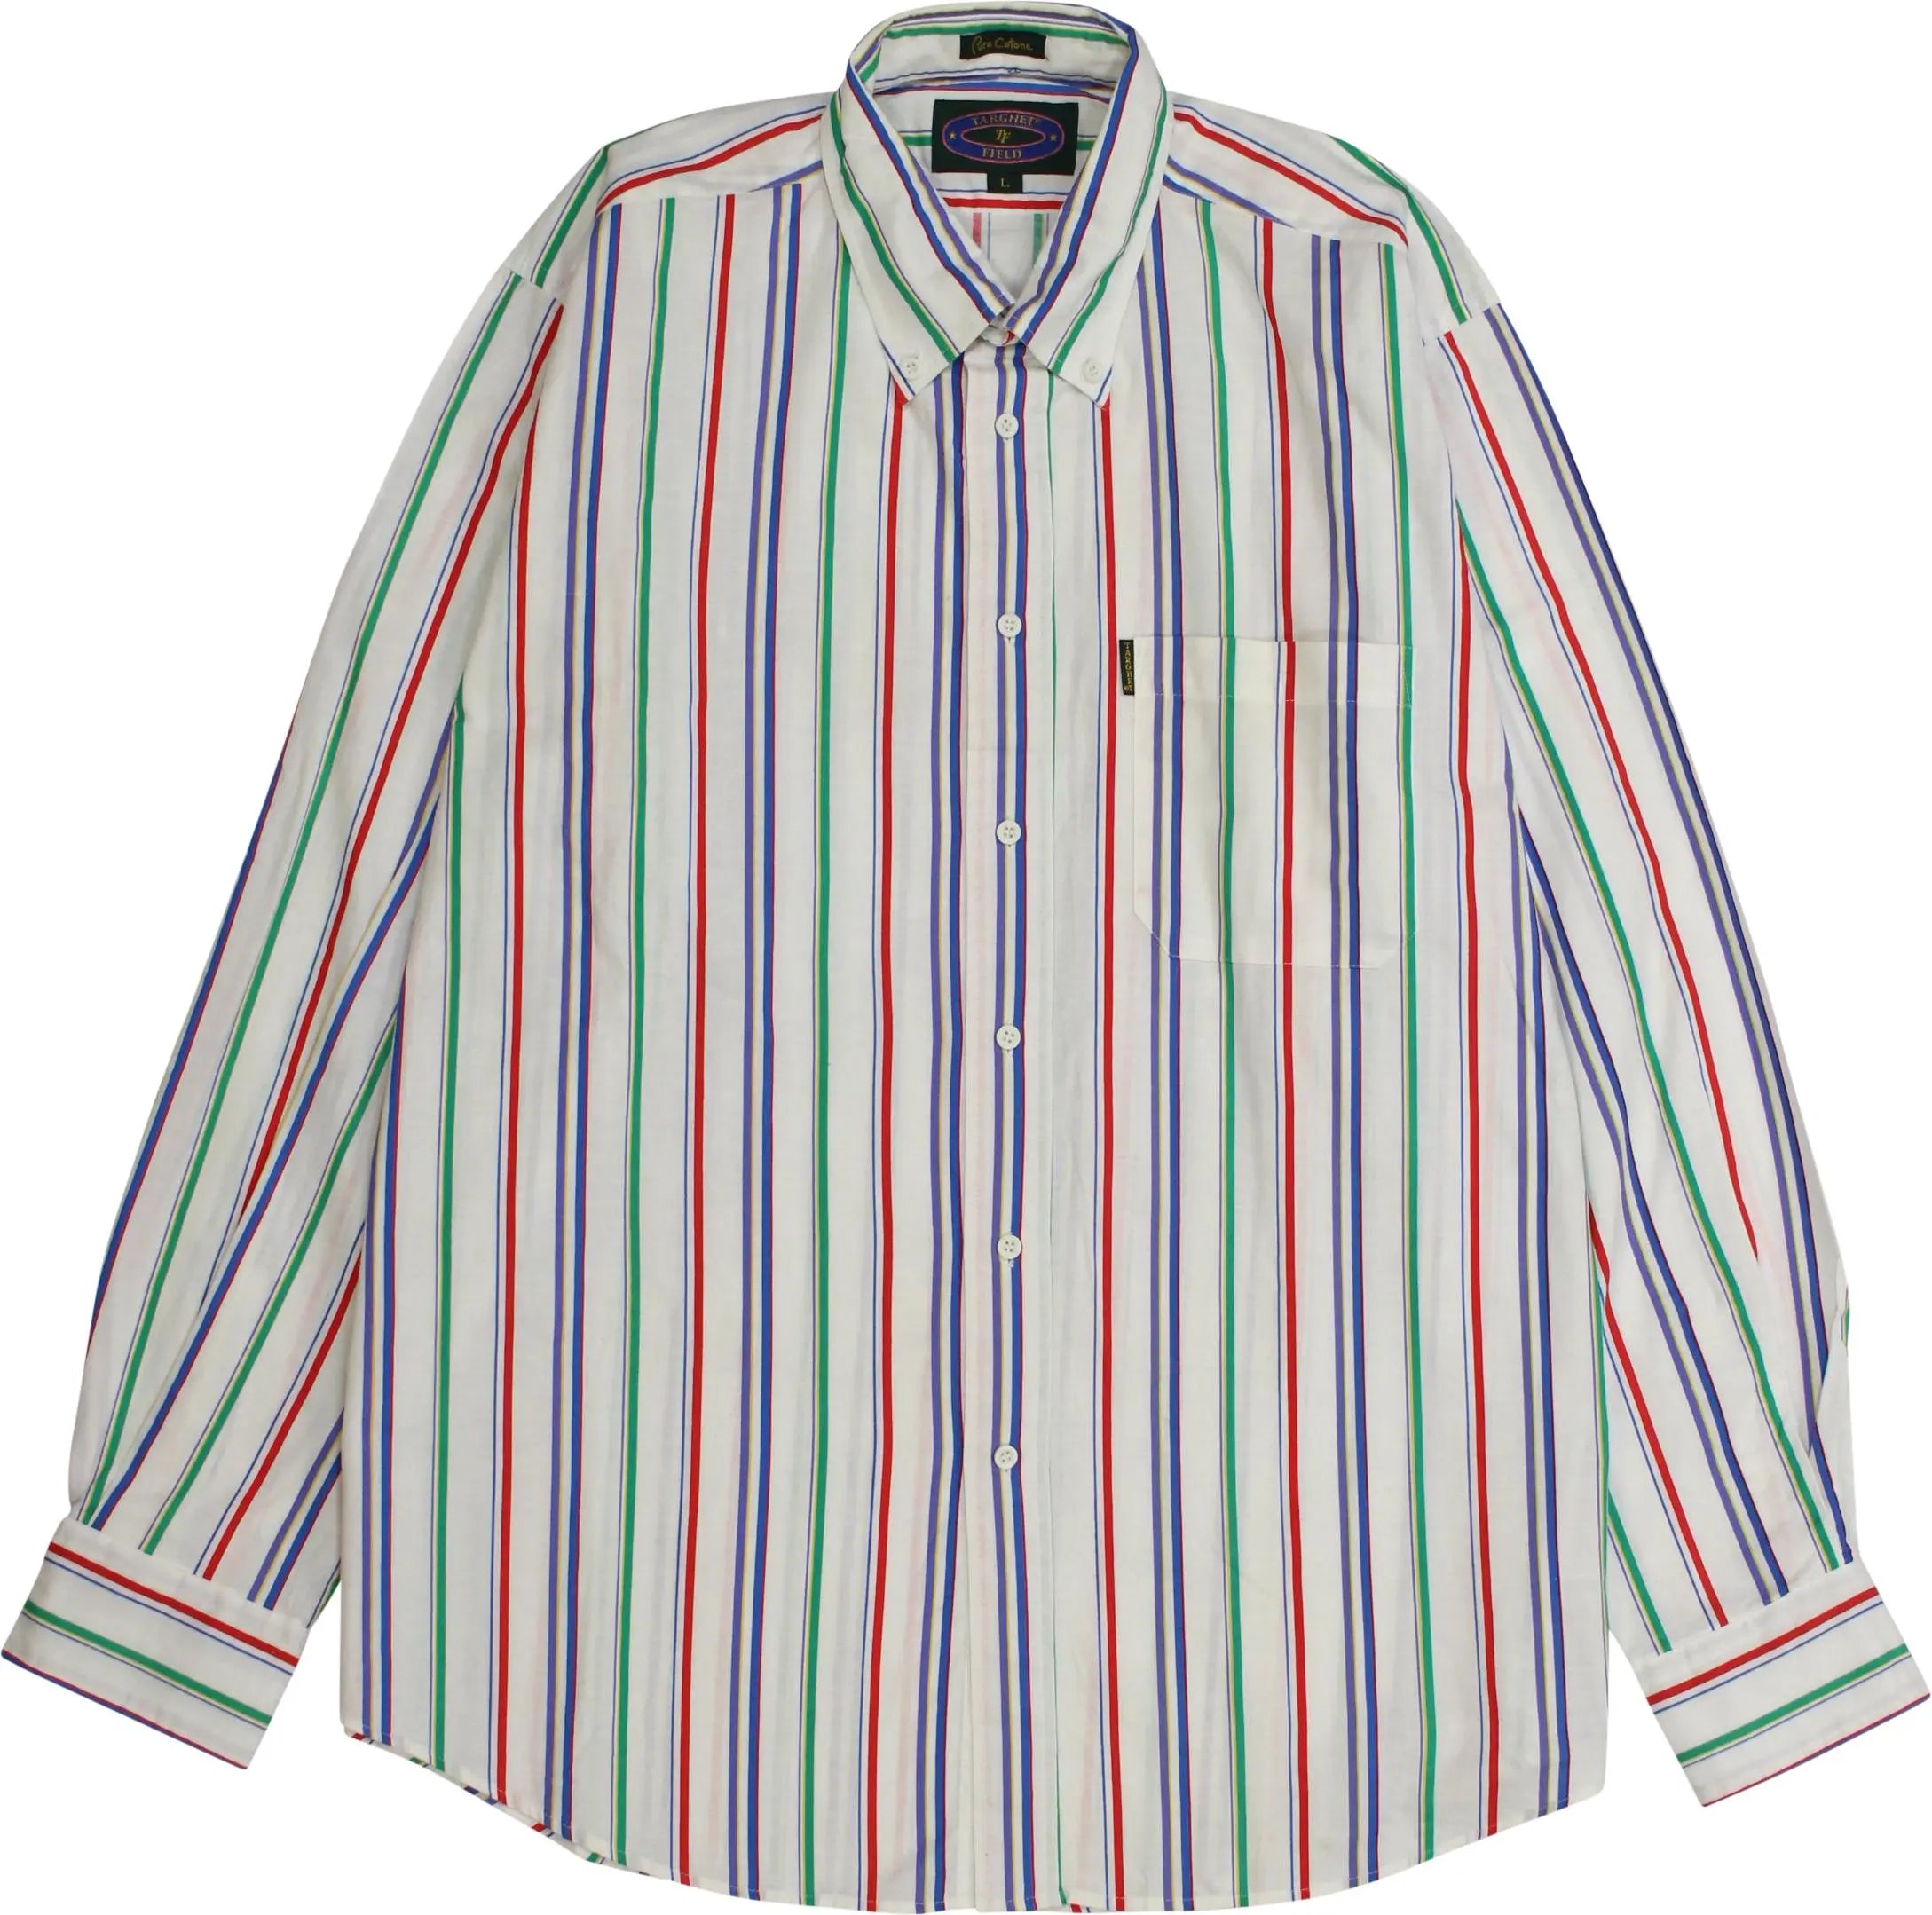 Targhet Field - 90s Striped Shirt- ThriftTale.com - Vintage and second handclothing